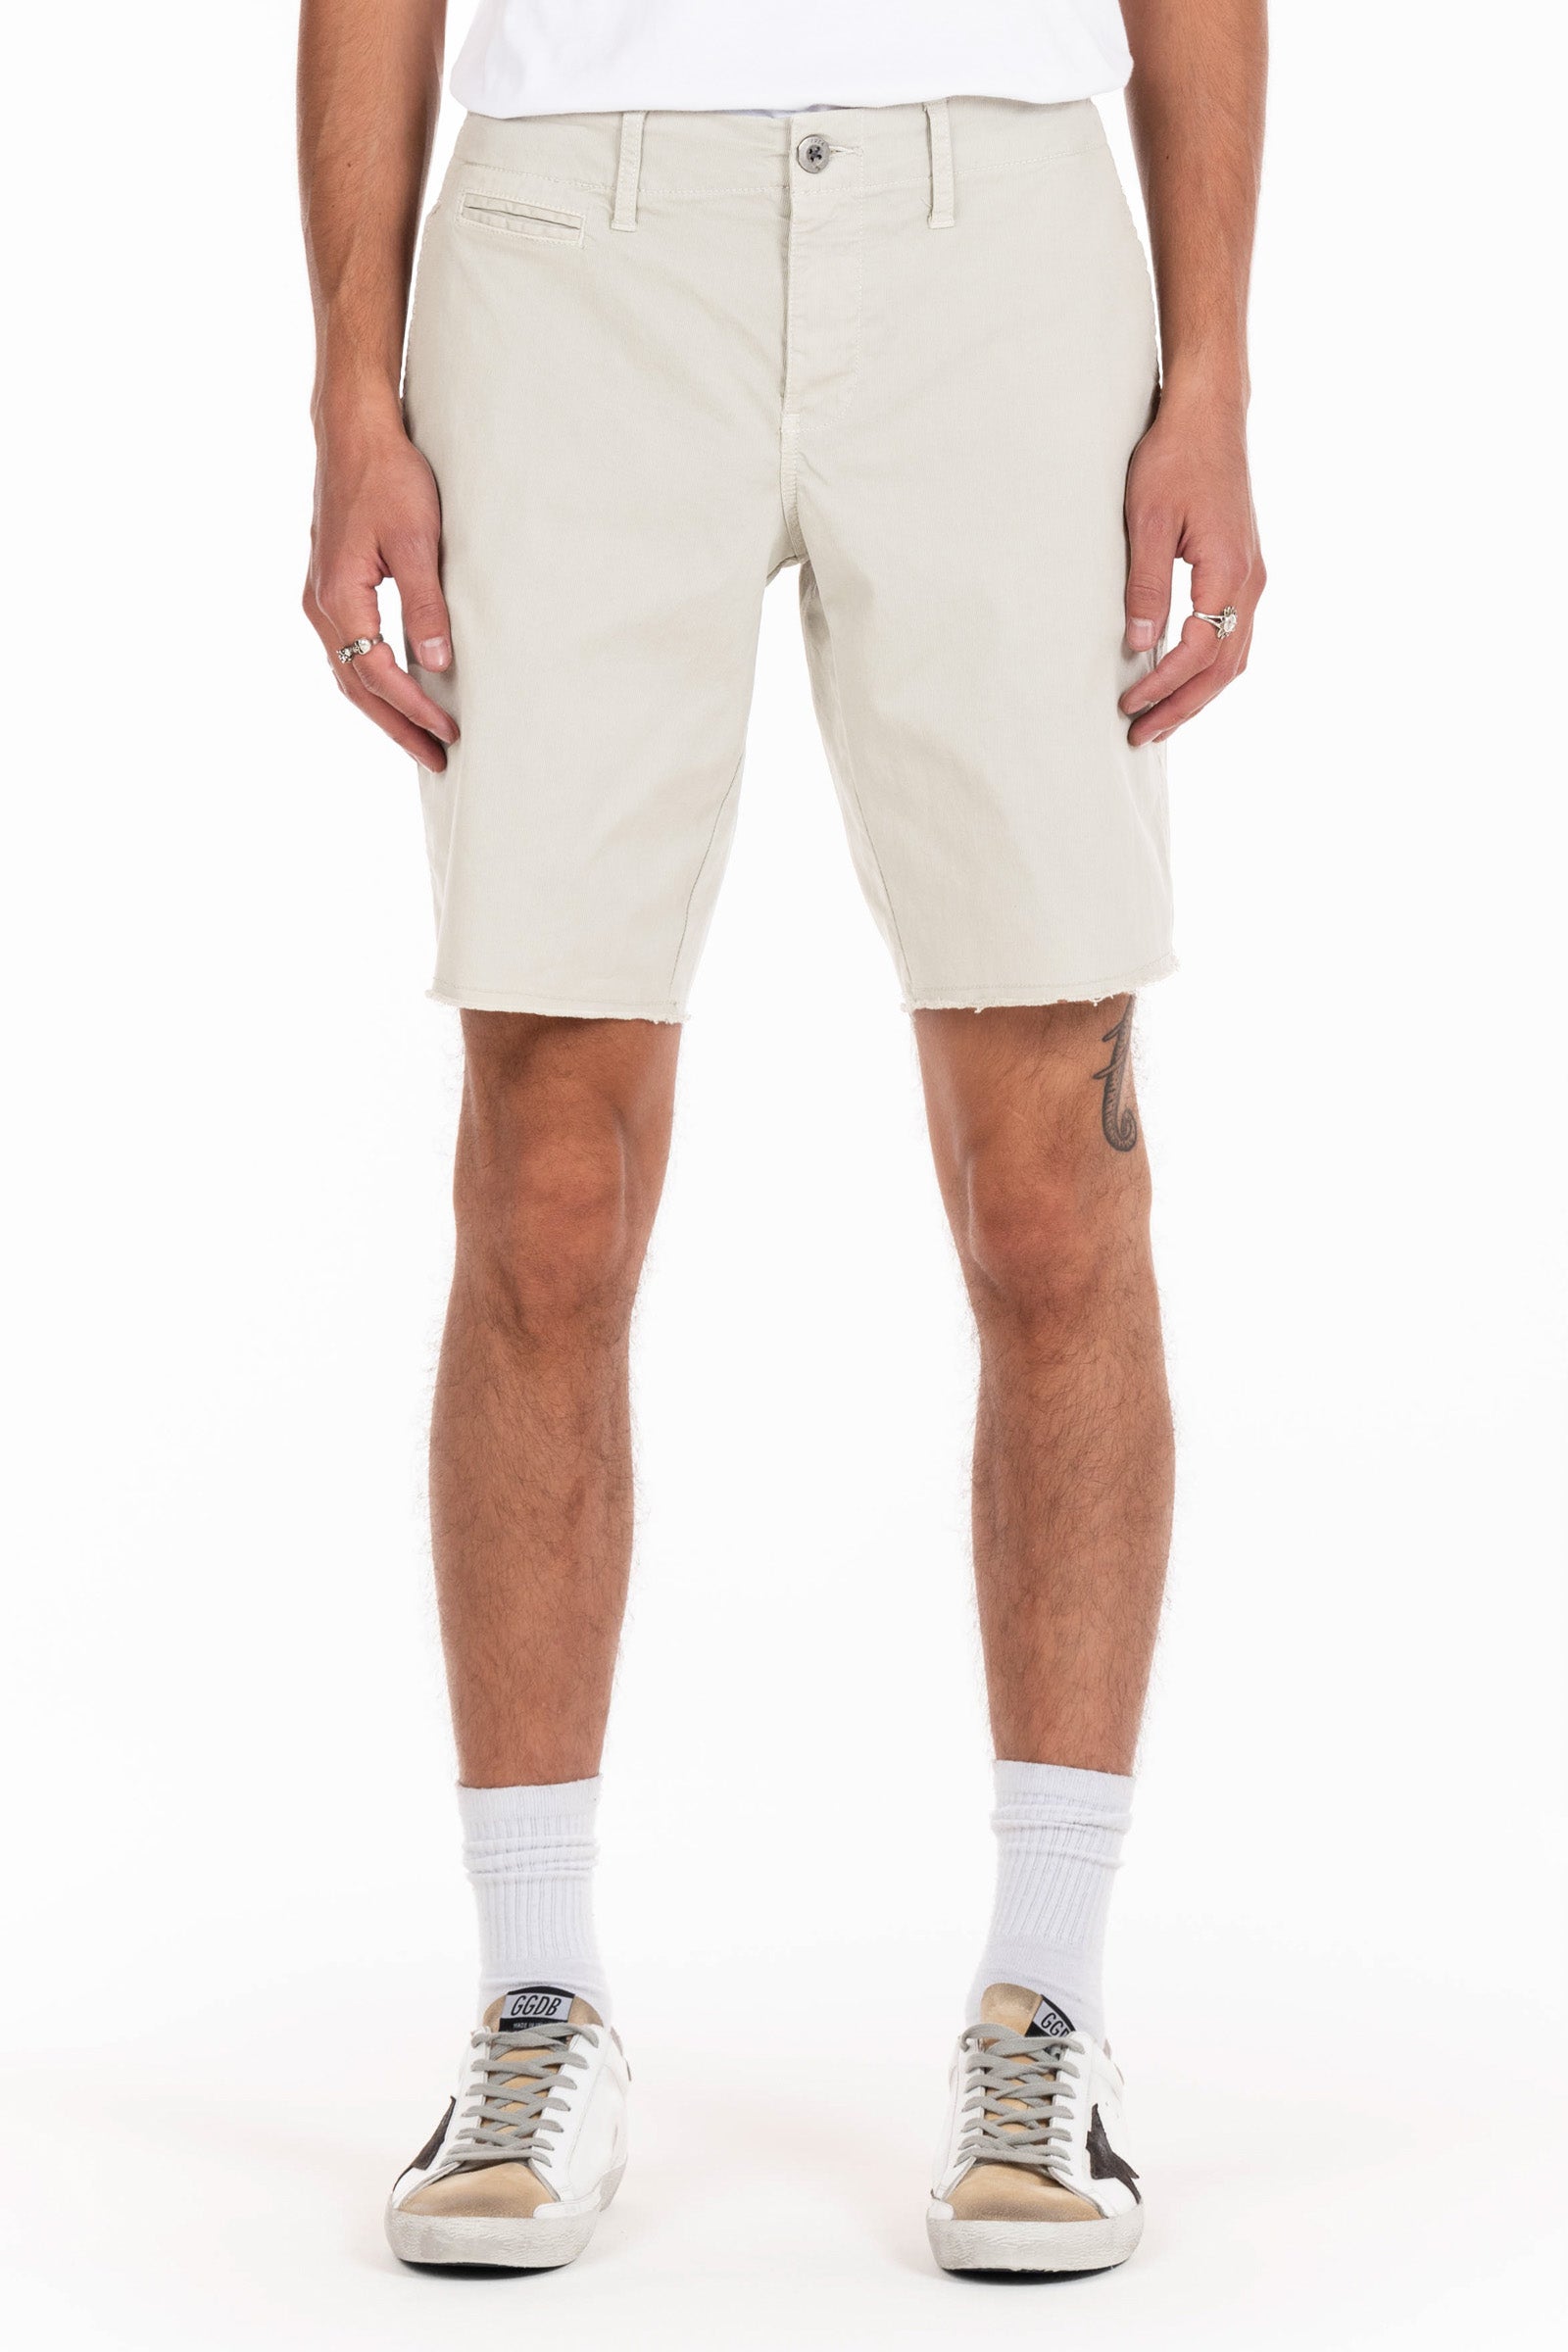 Original Paperbacks Rockland Chino Short in String on Model Front View